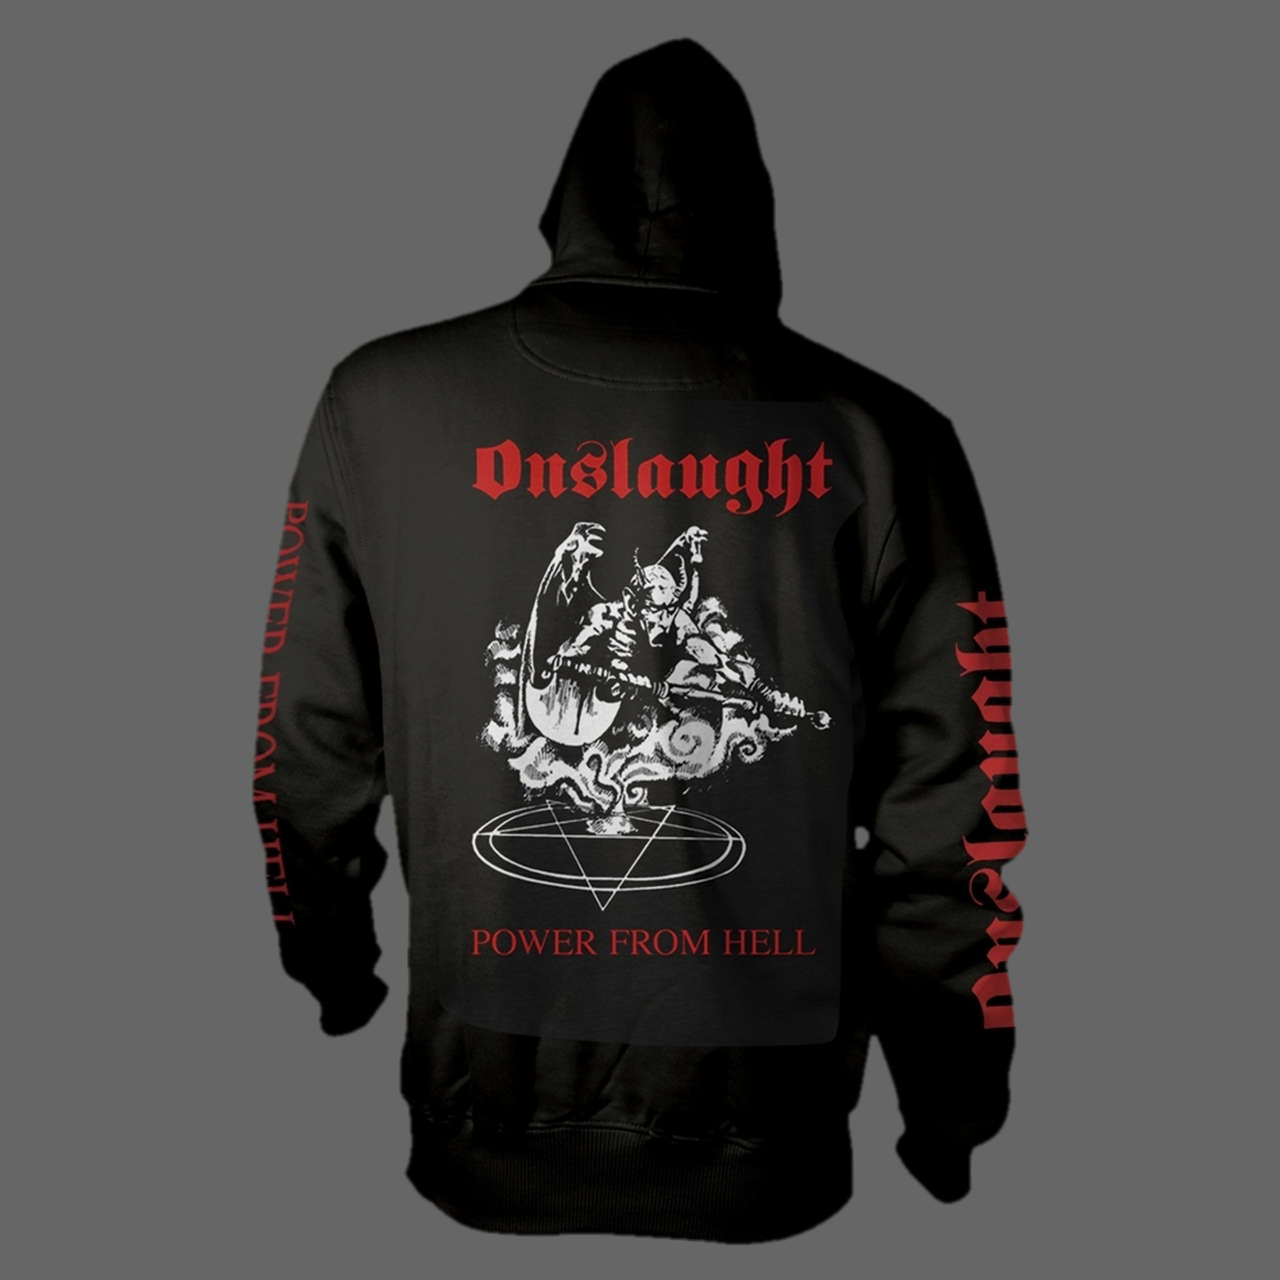 Onslaught - Power from Hell (Hoodie)